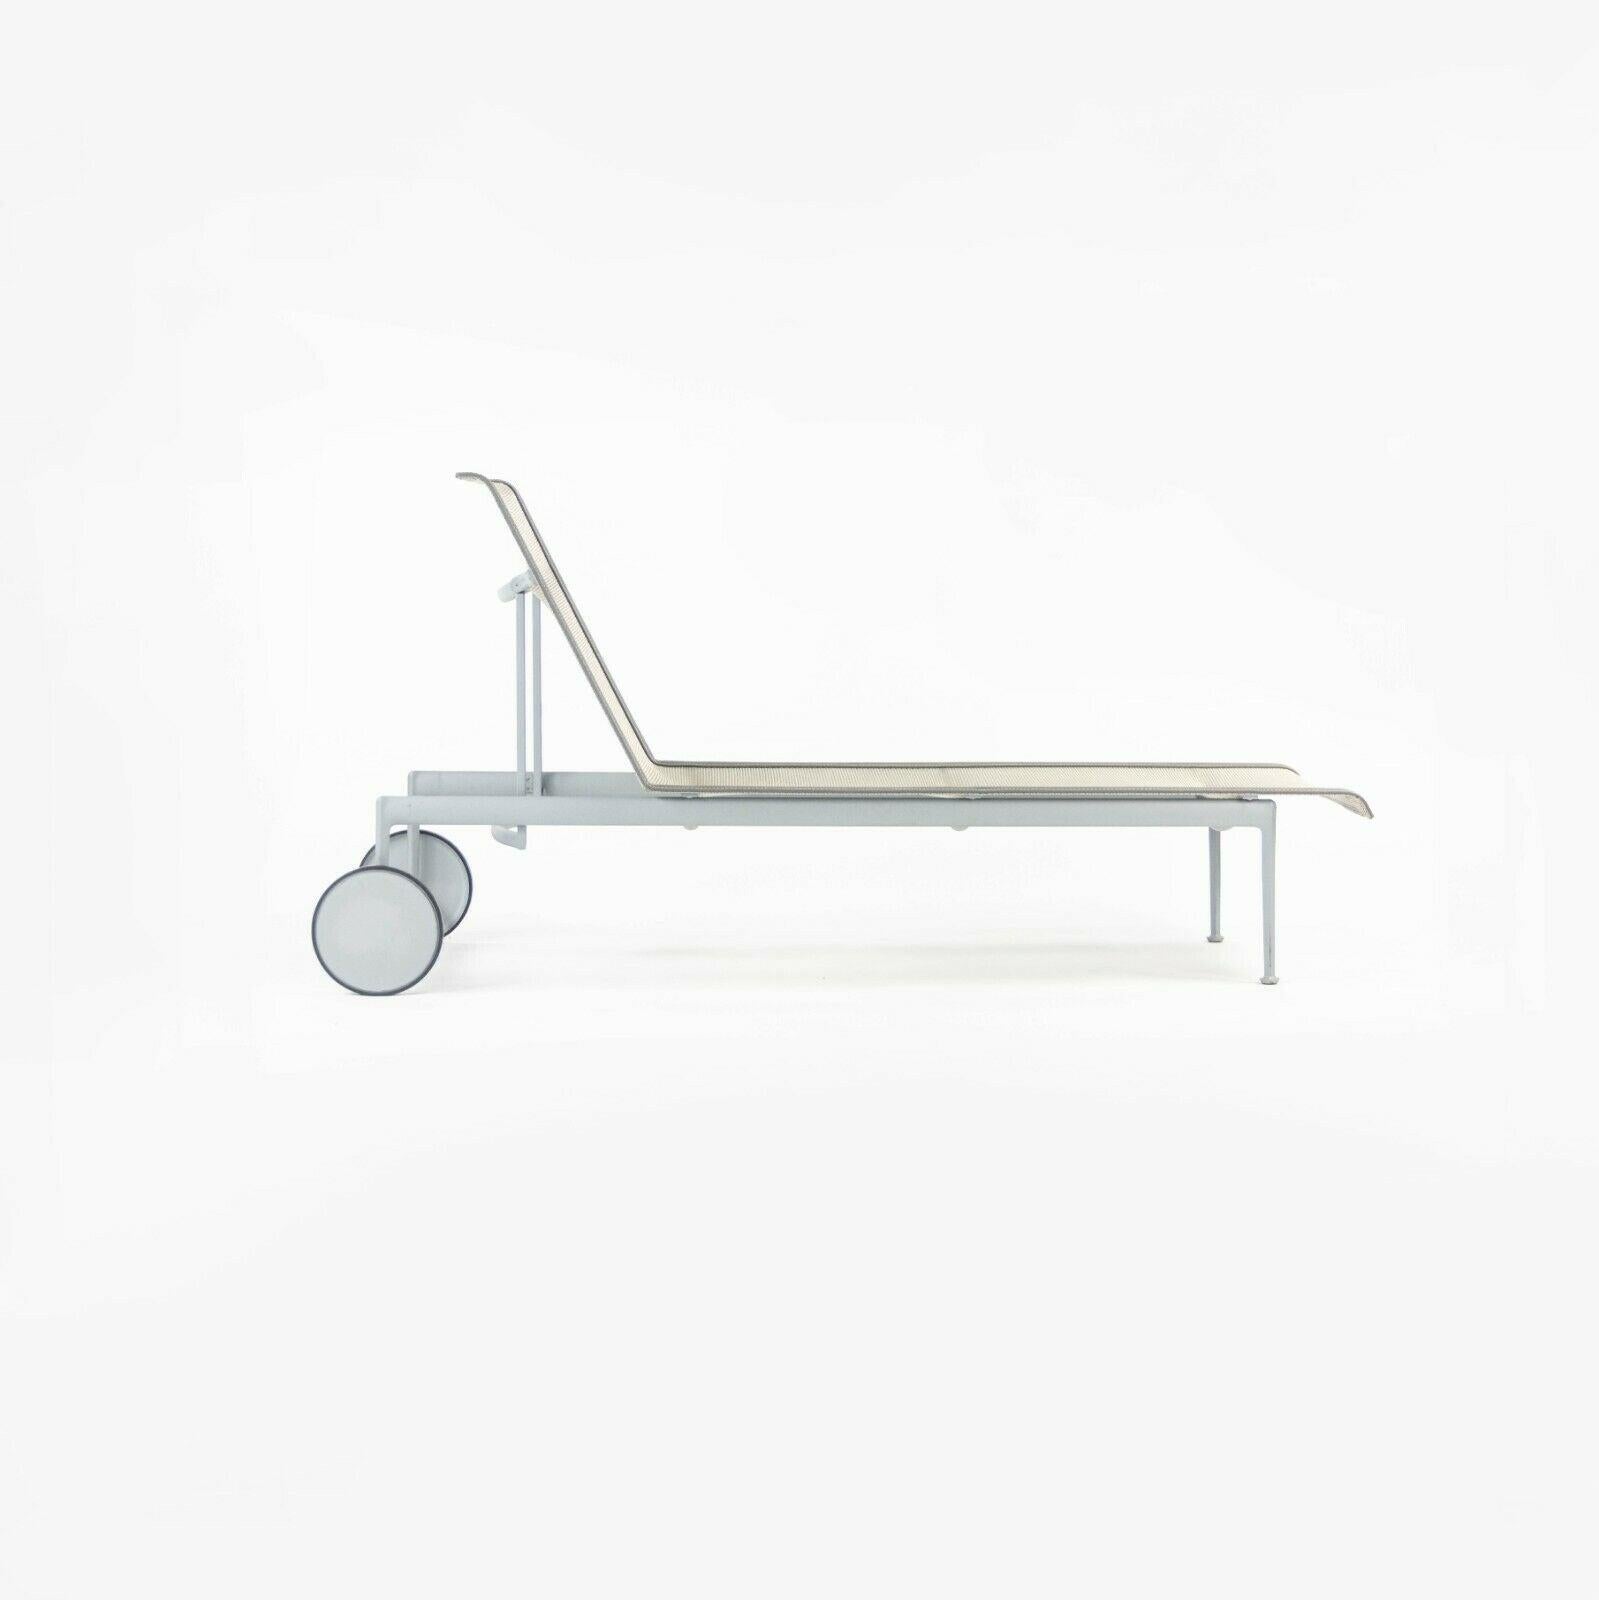 Contemporary 2012 Richard Schultz 1966 Series Adjustable Chaise Lounge Chair in Silver